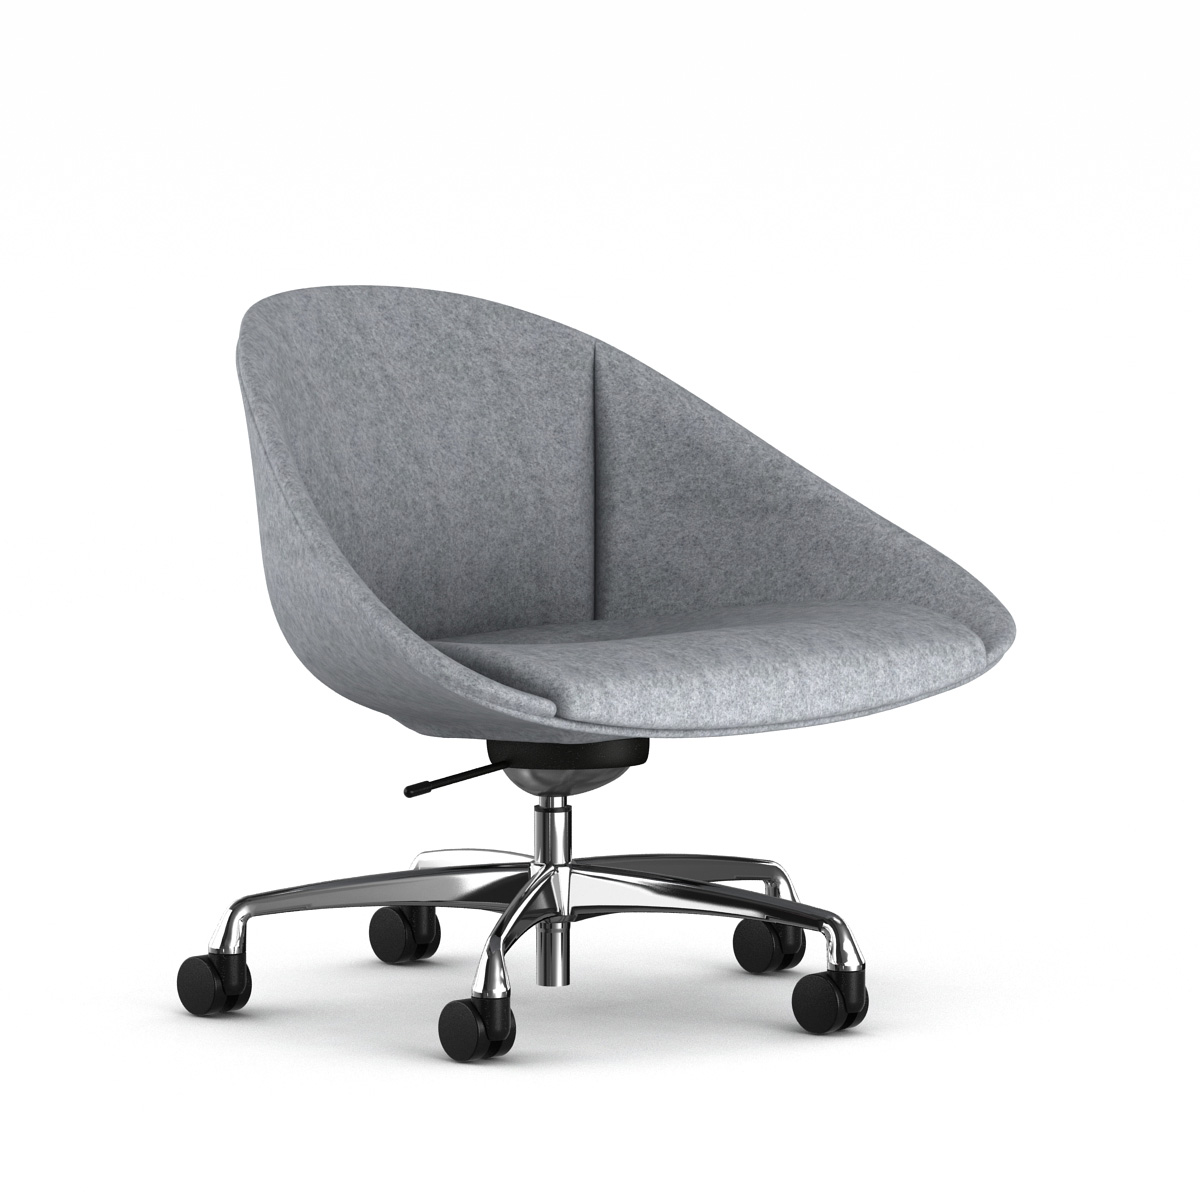 sable in grey fabric with talk base in castors